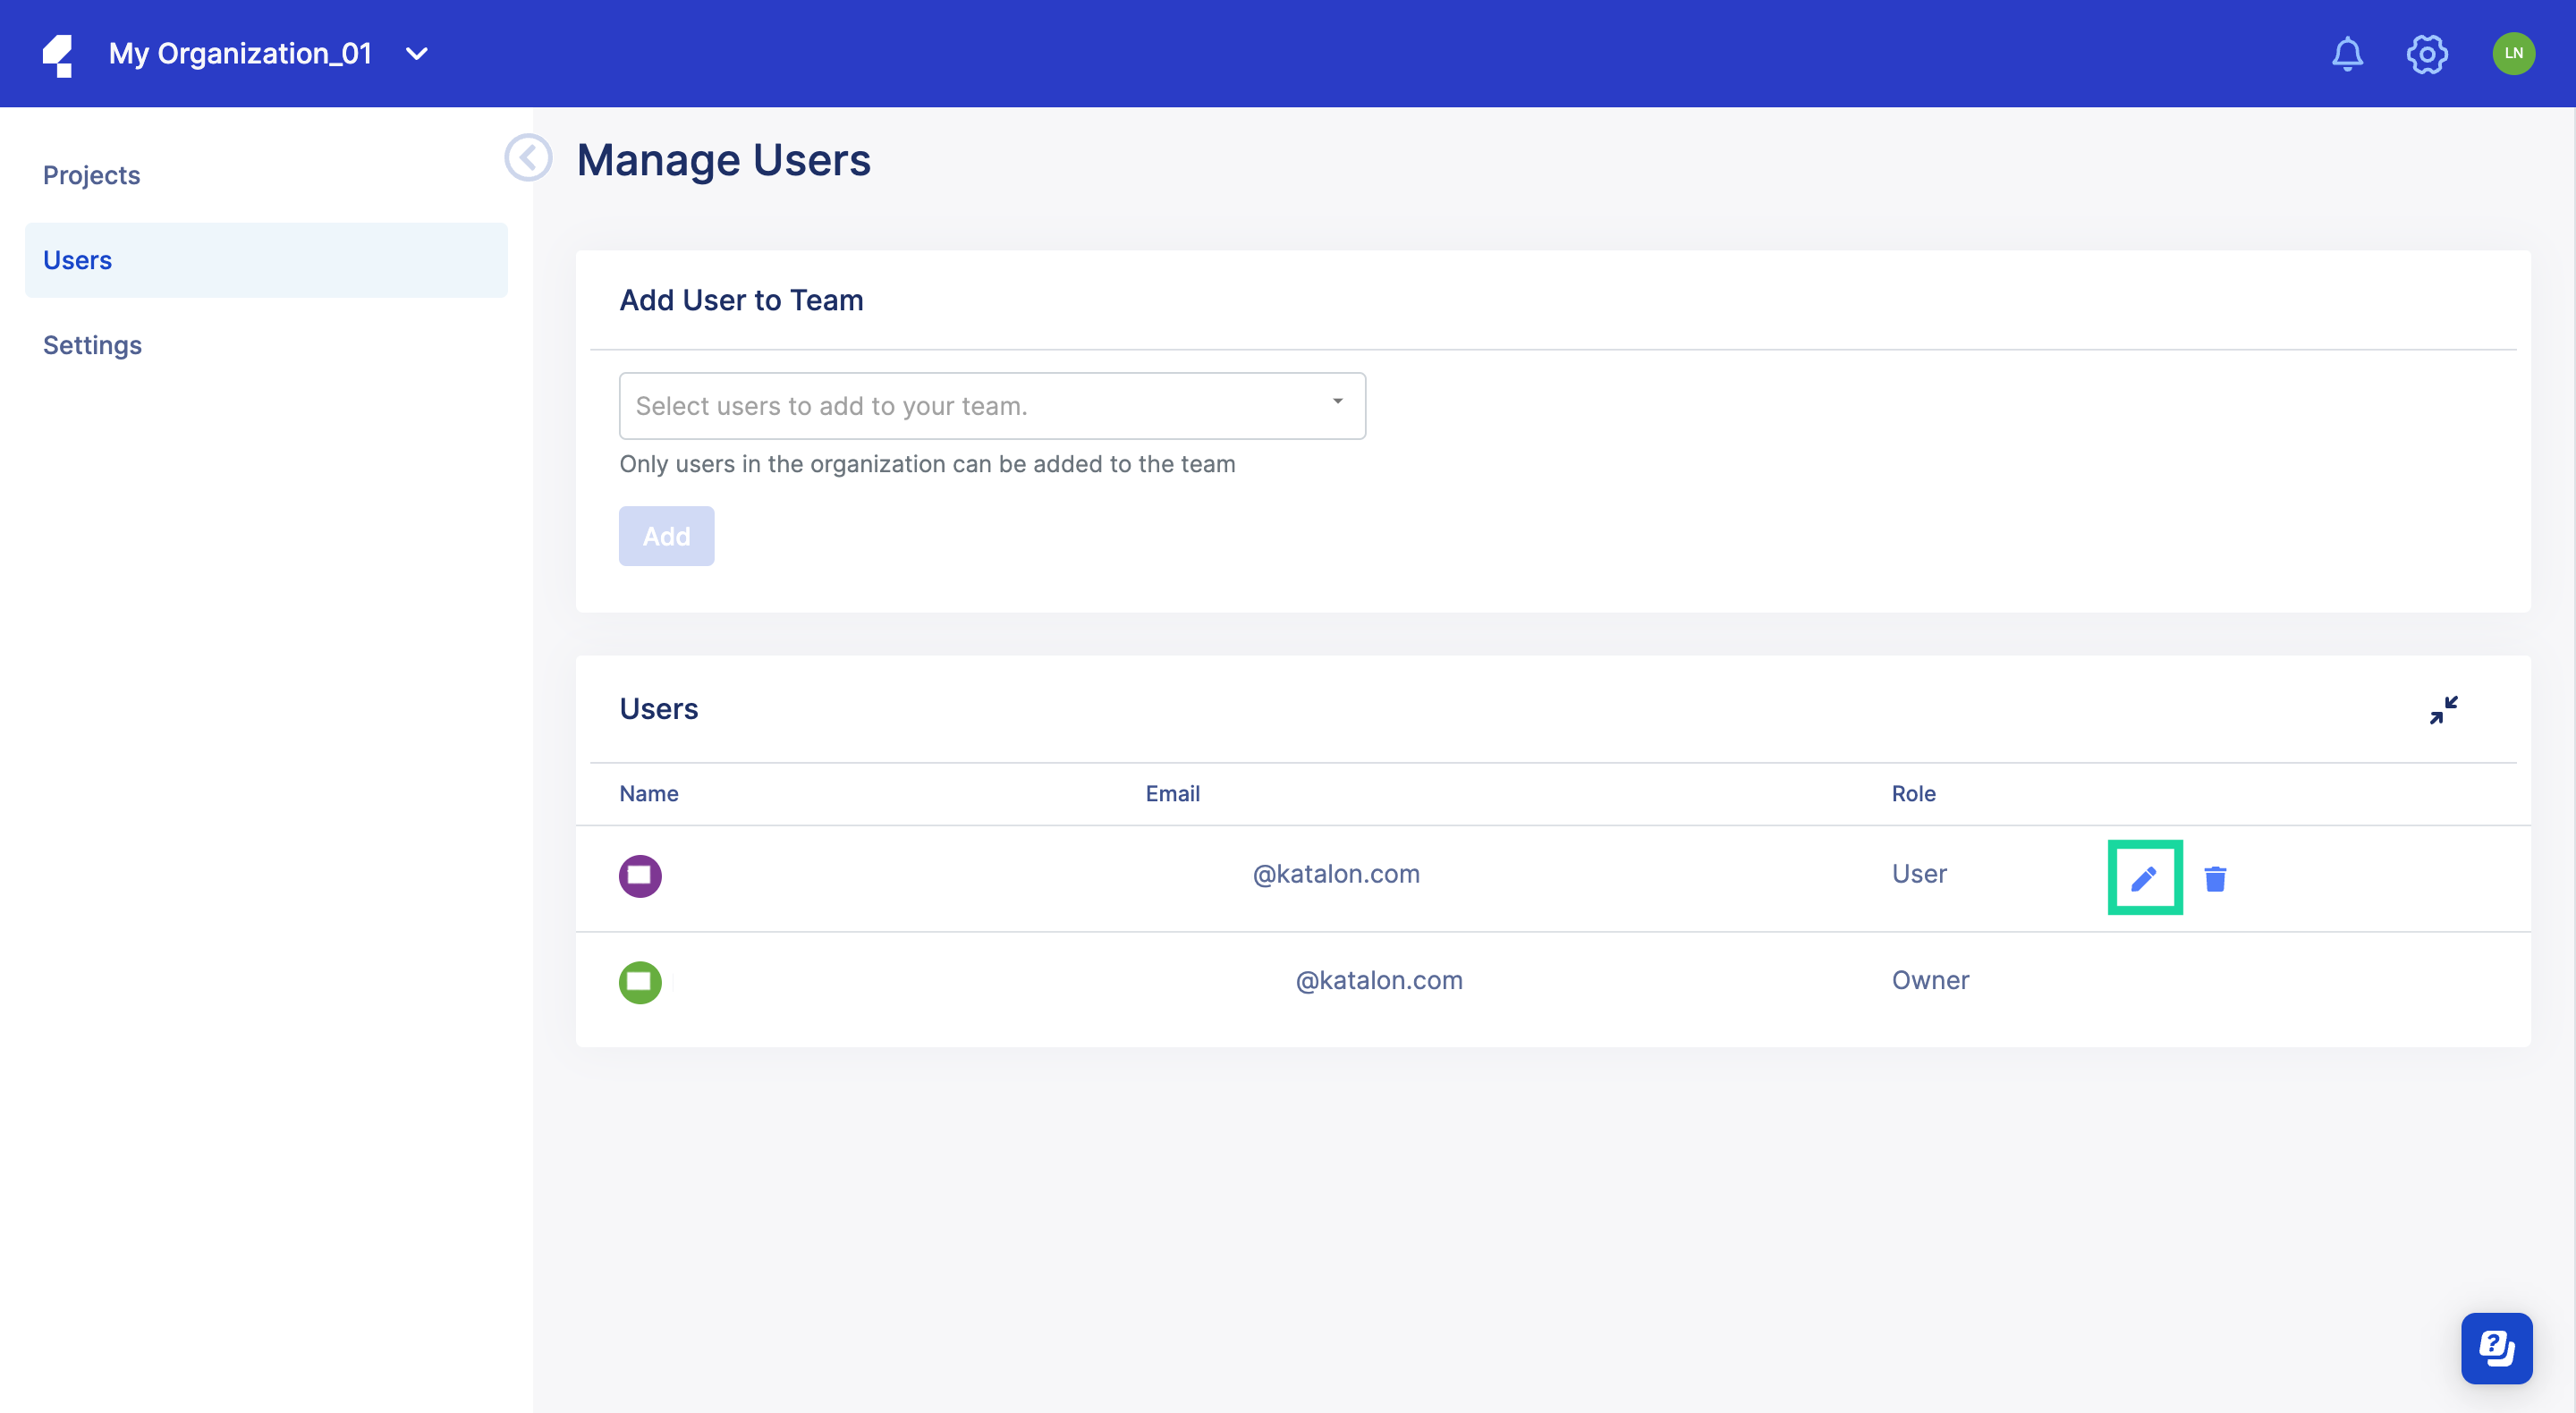 Manage Users page